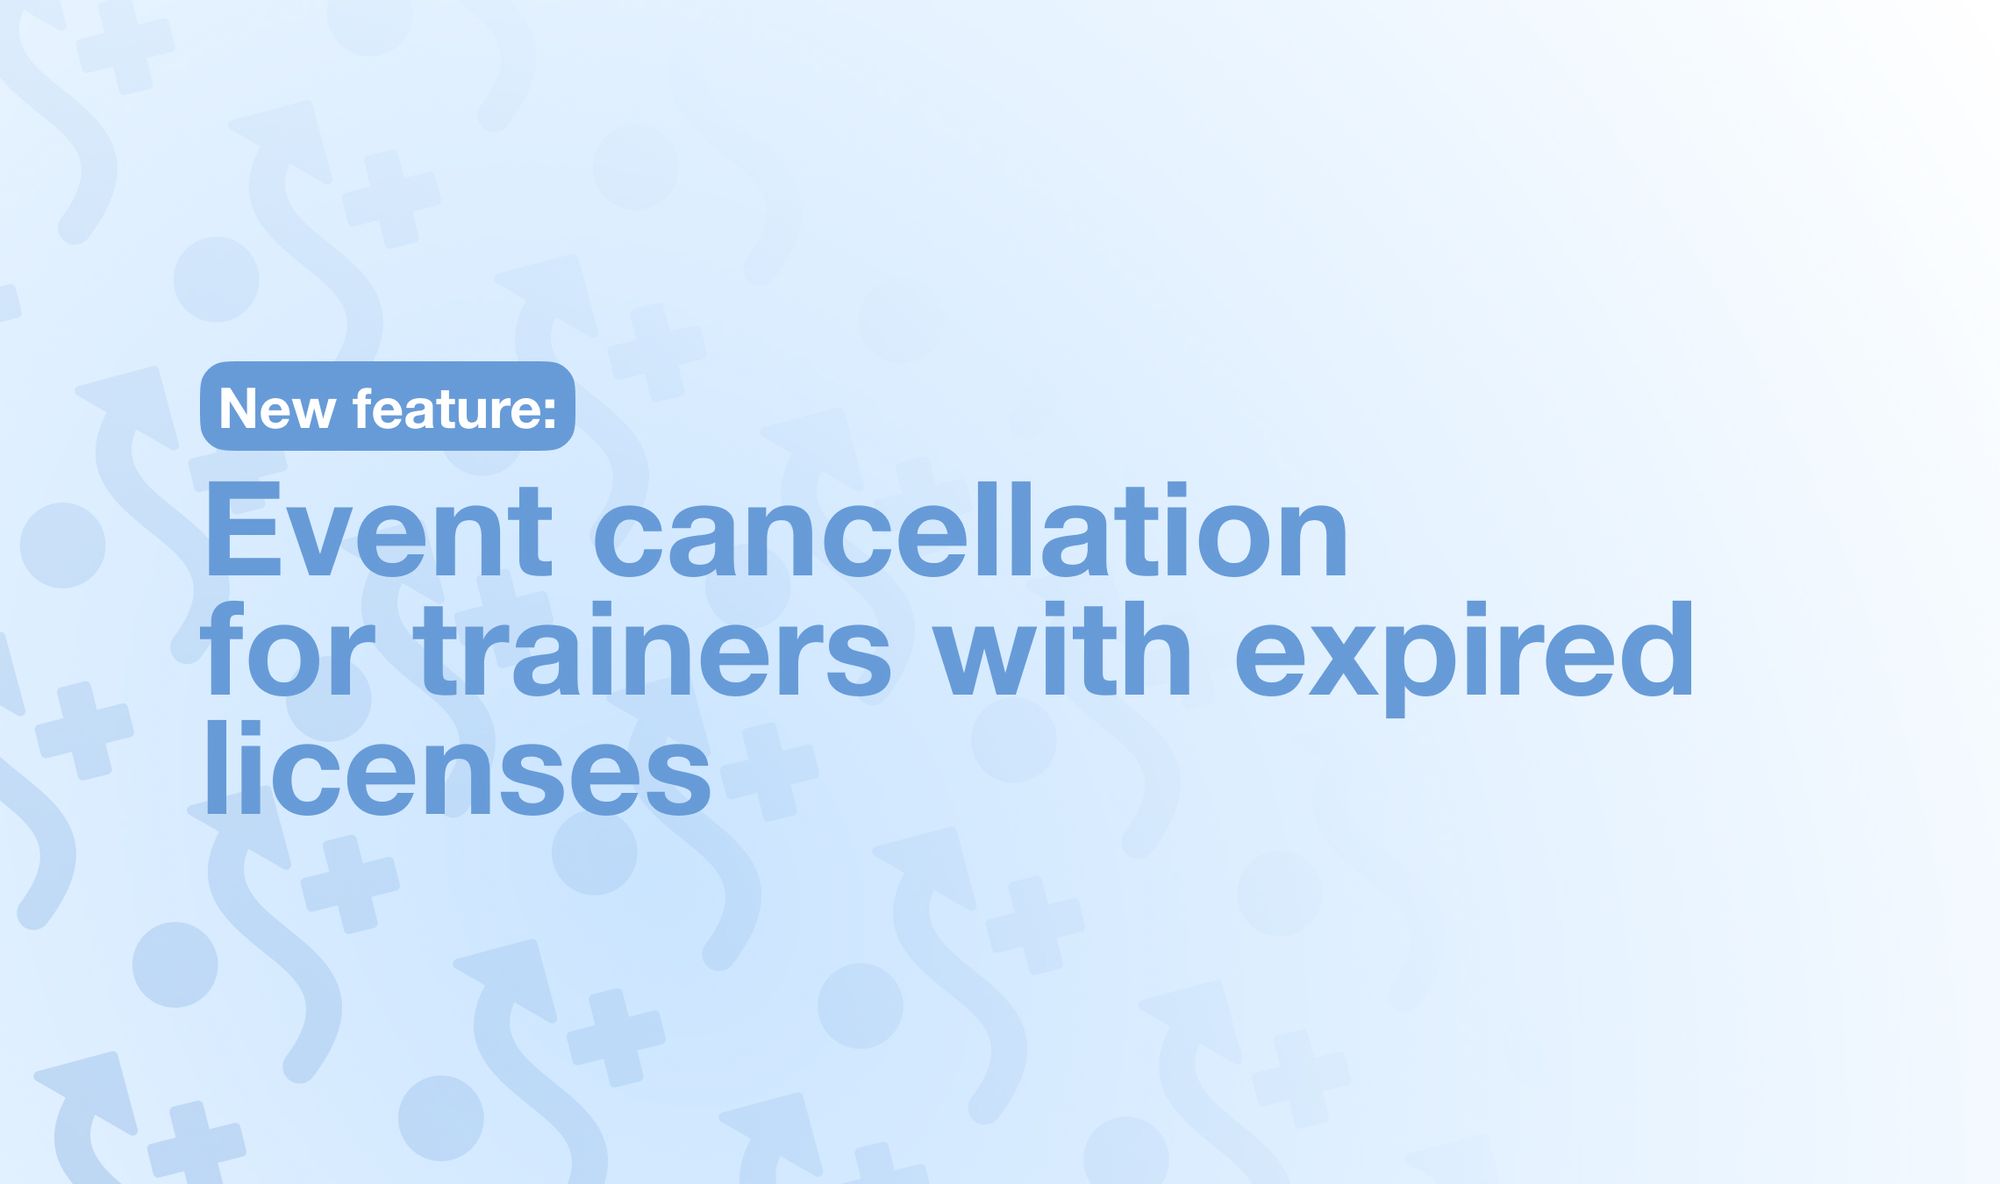 Event cancellation for trainers with expired licenses